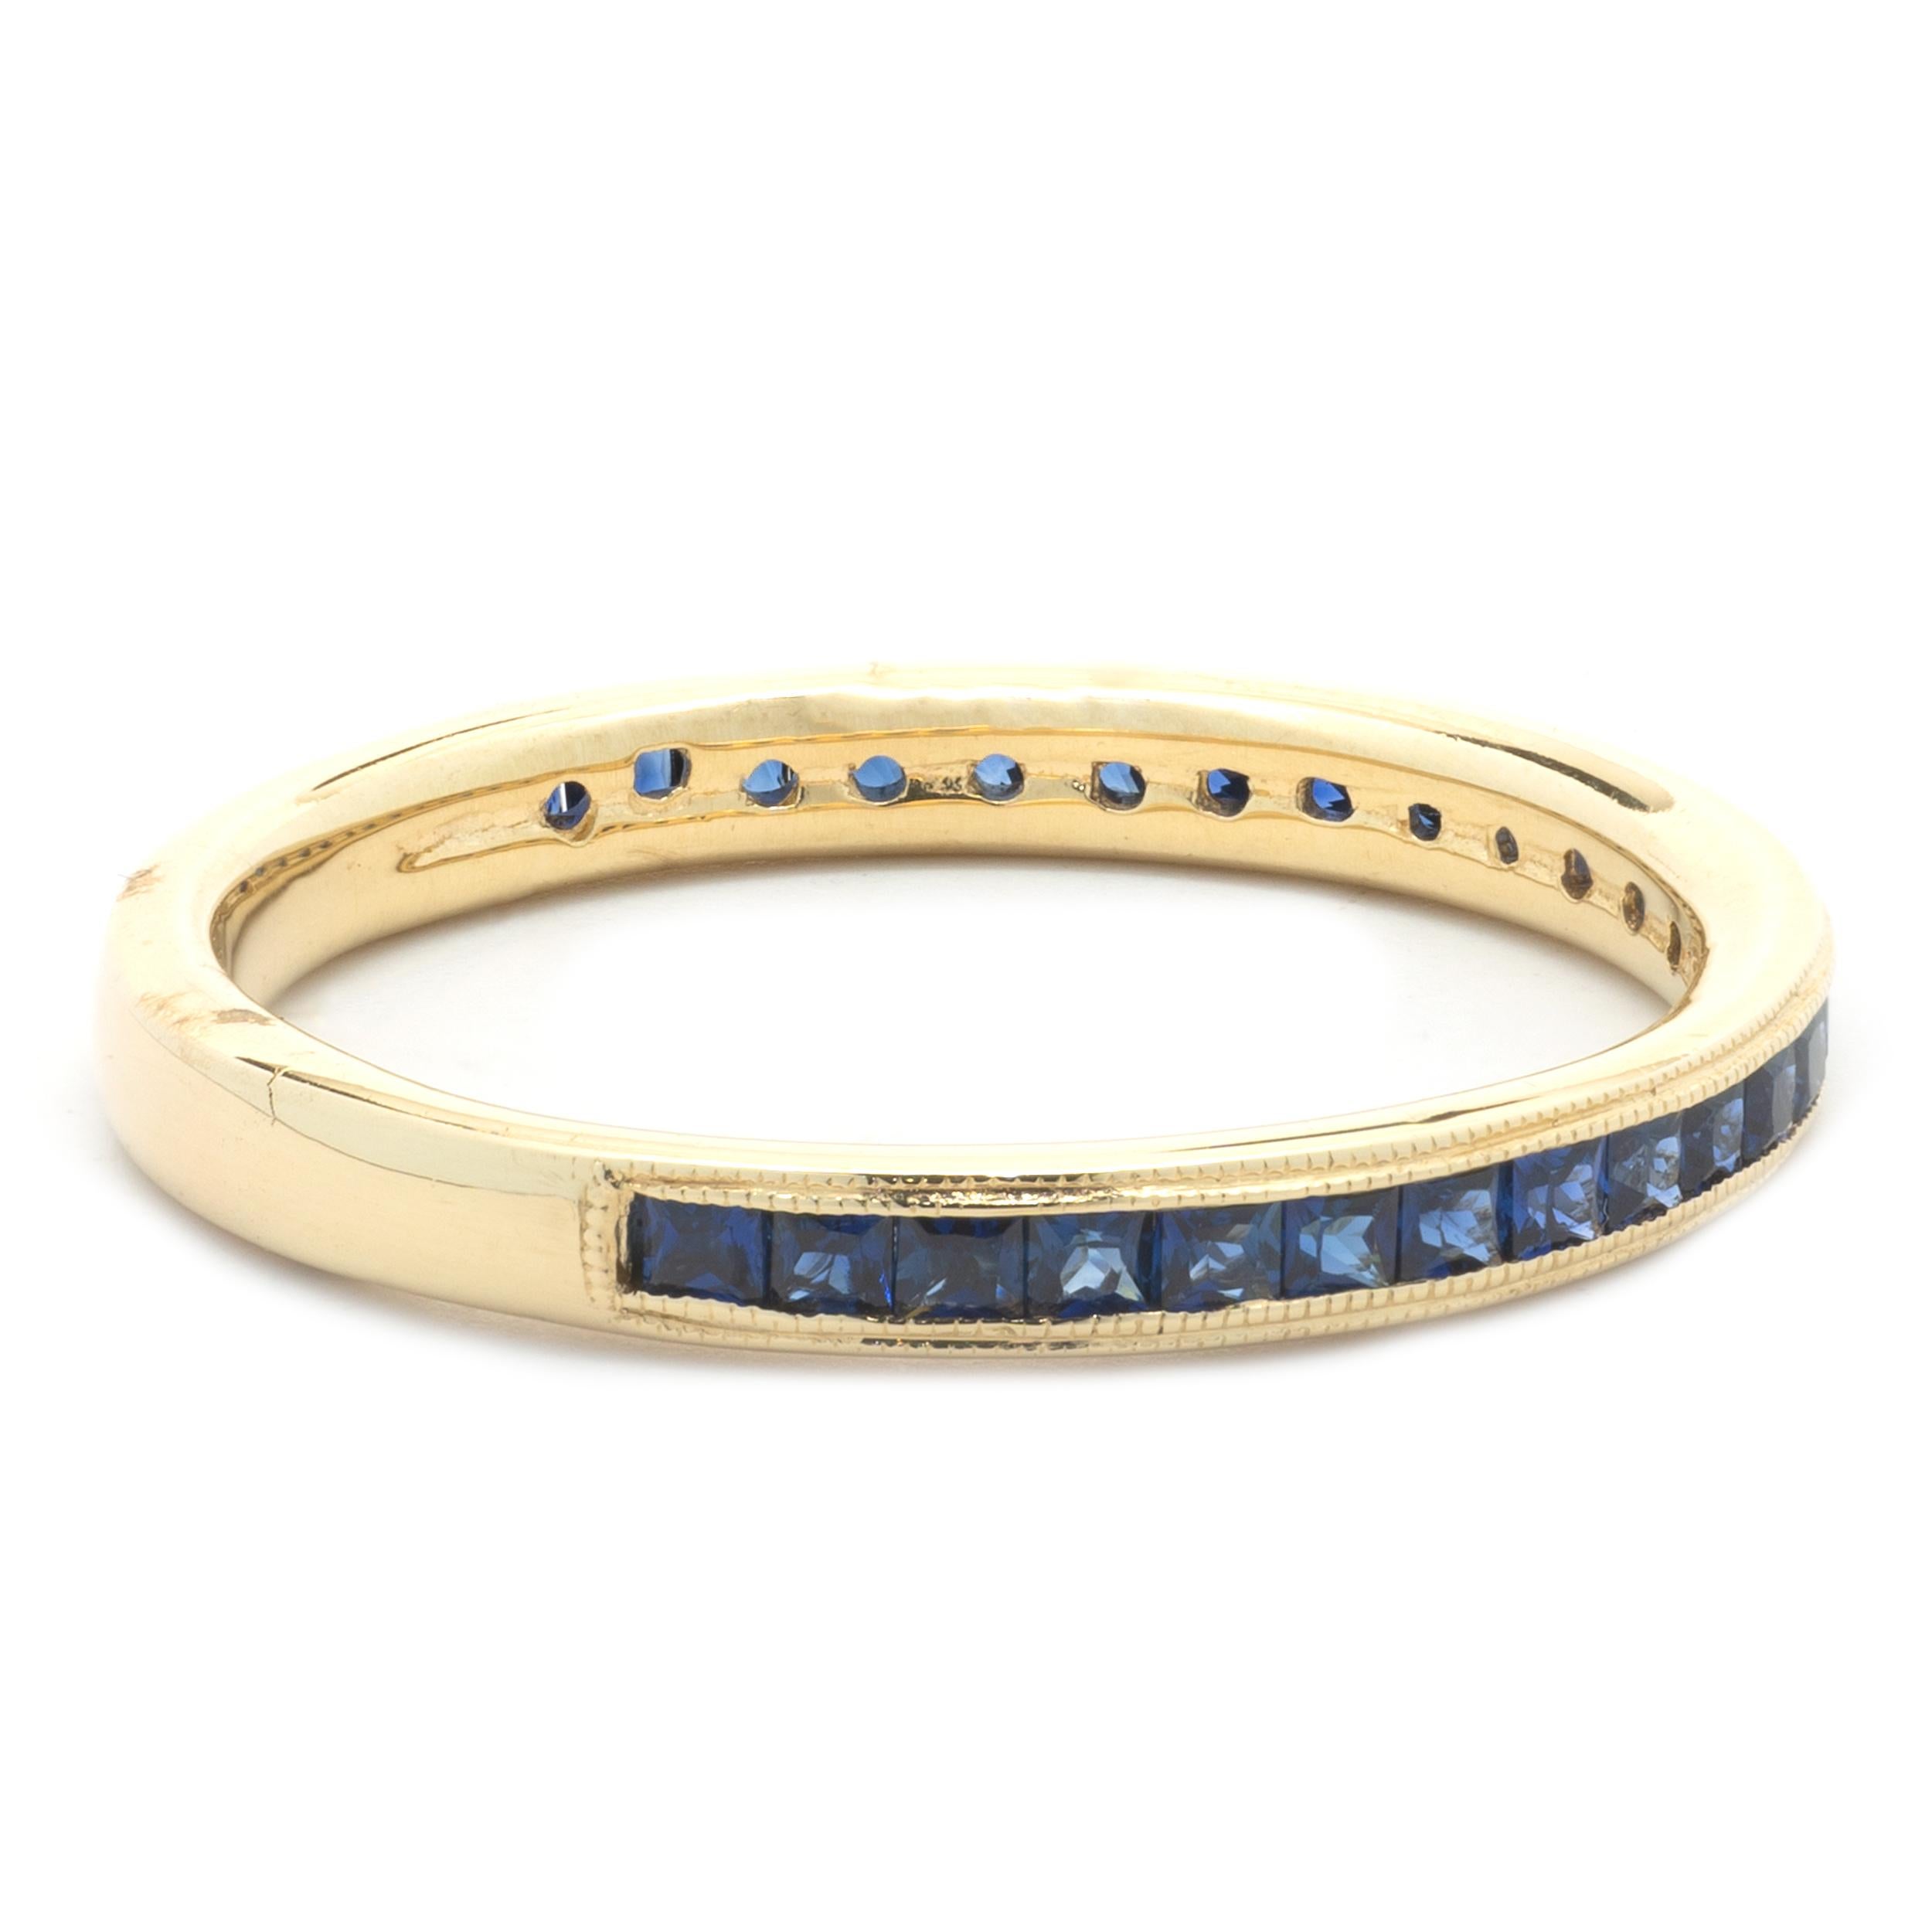 Designer: custom design
Material: 18K yellow gold
Sapphire: 27 princess cut = 1.00cttw
Color: Blue
Clarity: AAA, ideal deep royal blue
Dimensions: ring top measures 2.80mm wide
Ring Size: 10.25 (please allow two extra shipping days for sizing